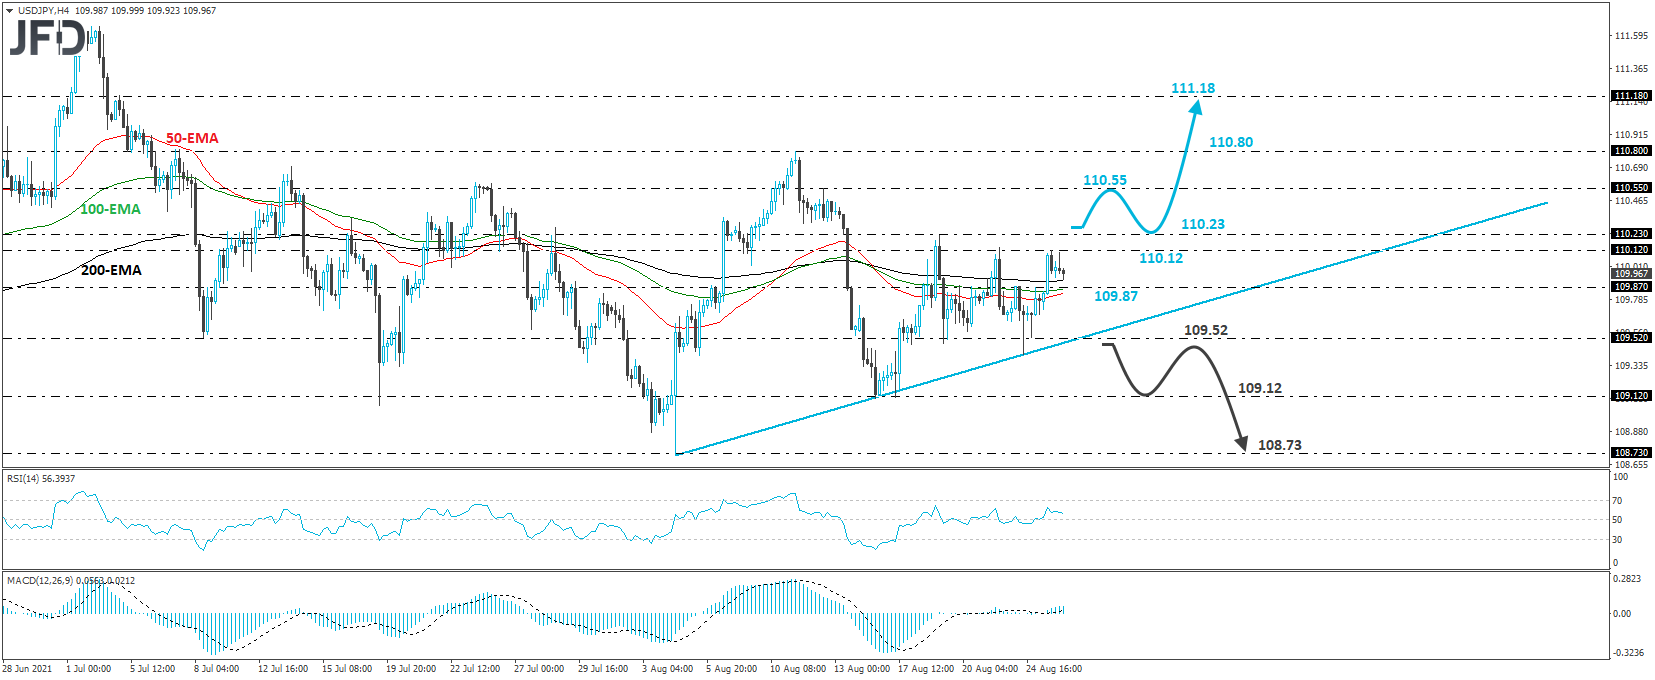 USD/JPY 4-hour chart technical analysis